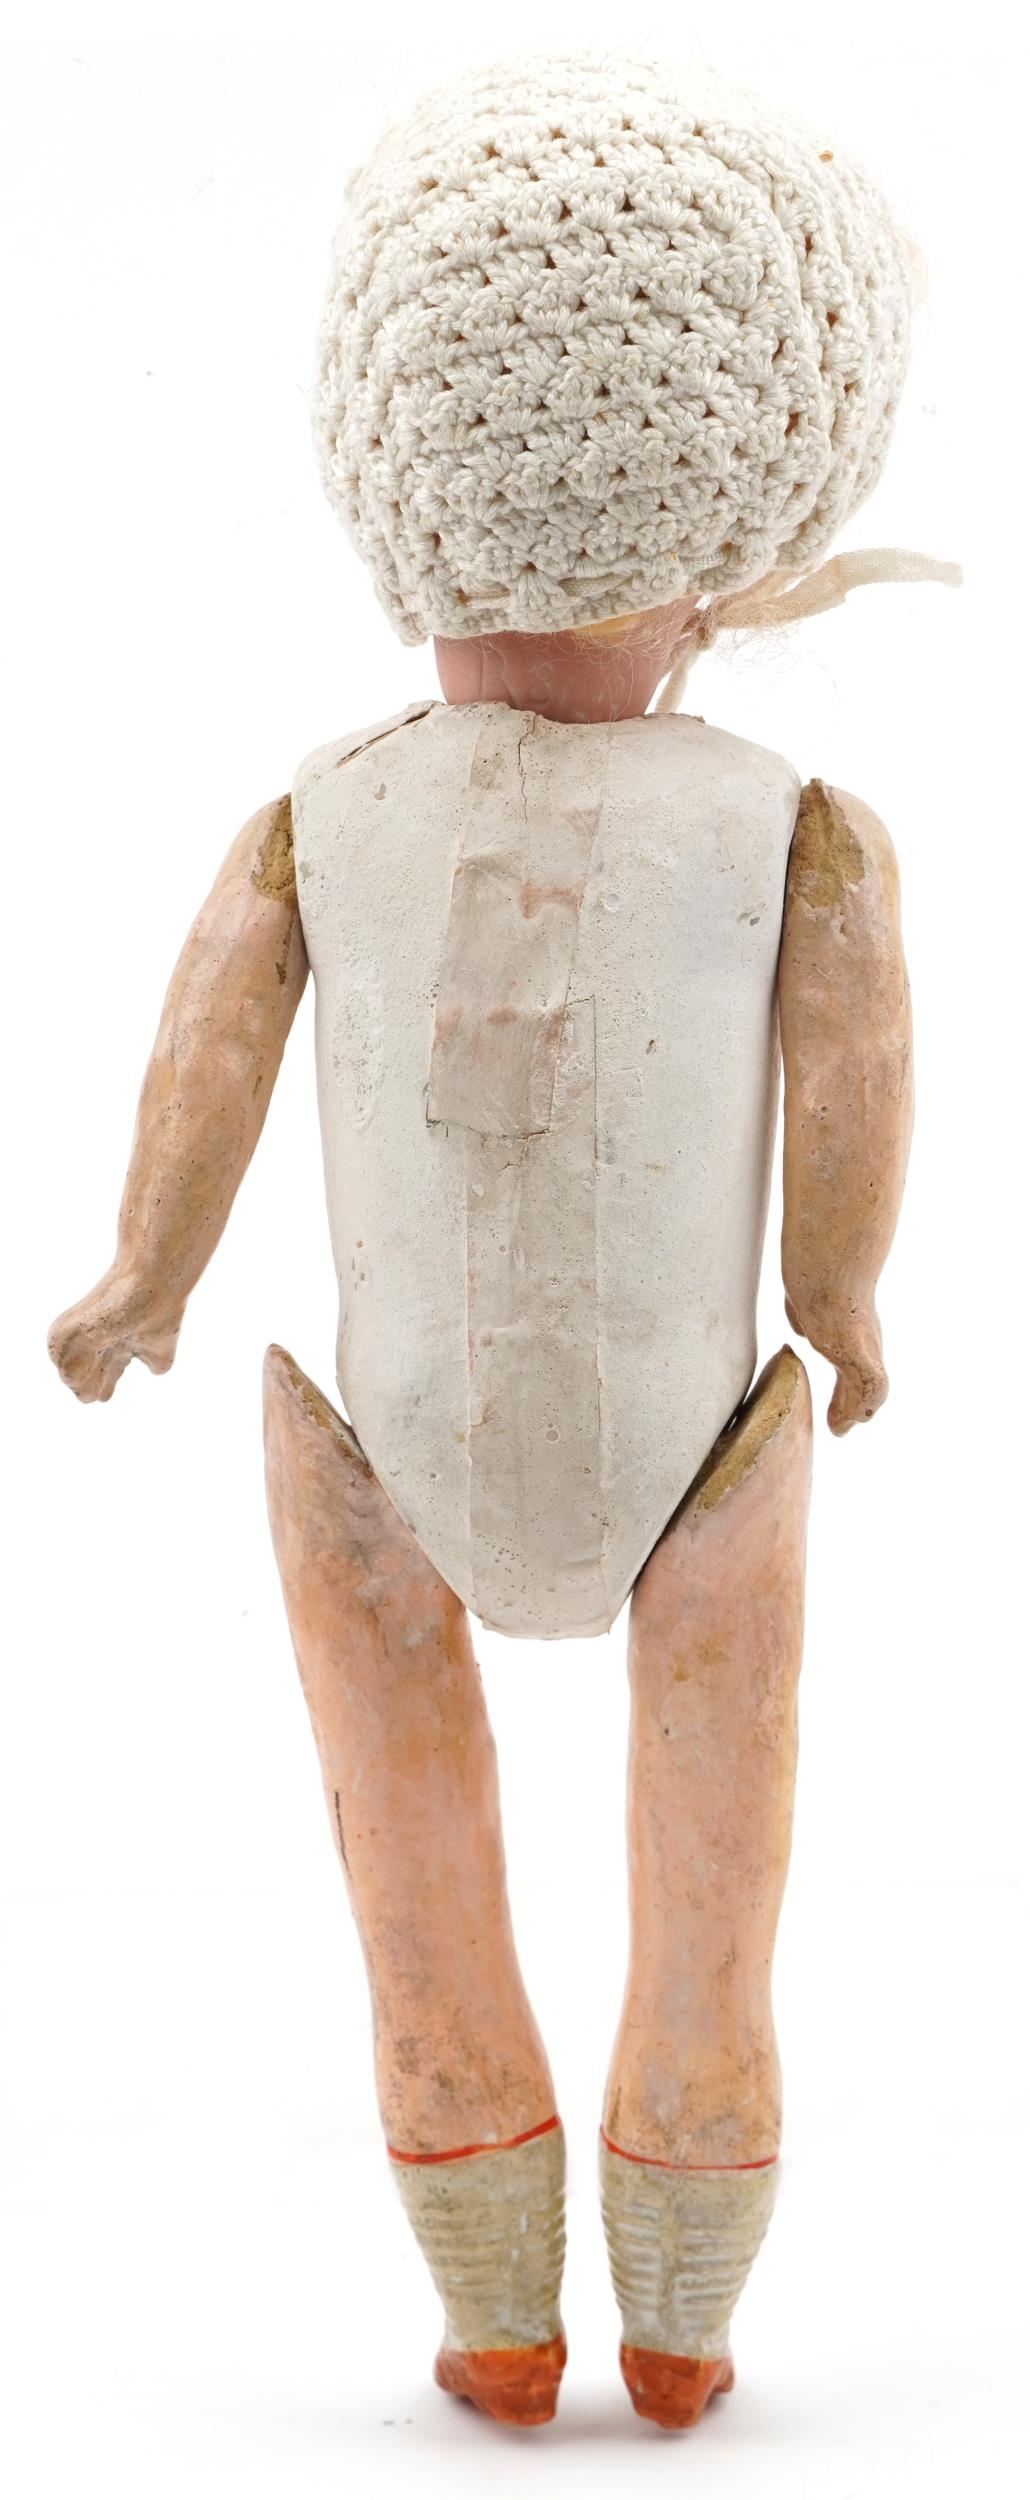 Antique German bisque headed doll with open close eyes and jointed limbs, impressed 21 R 8/0 2 to - Image 2 of 3